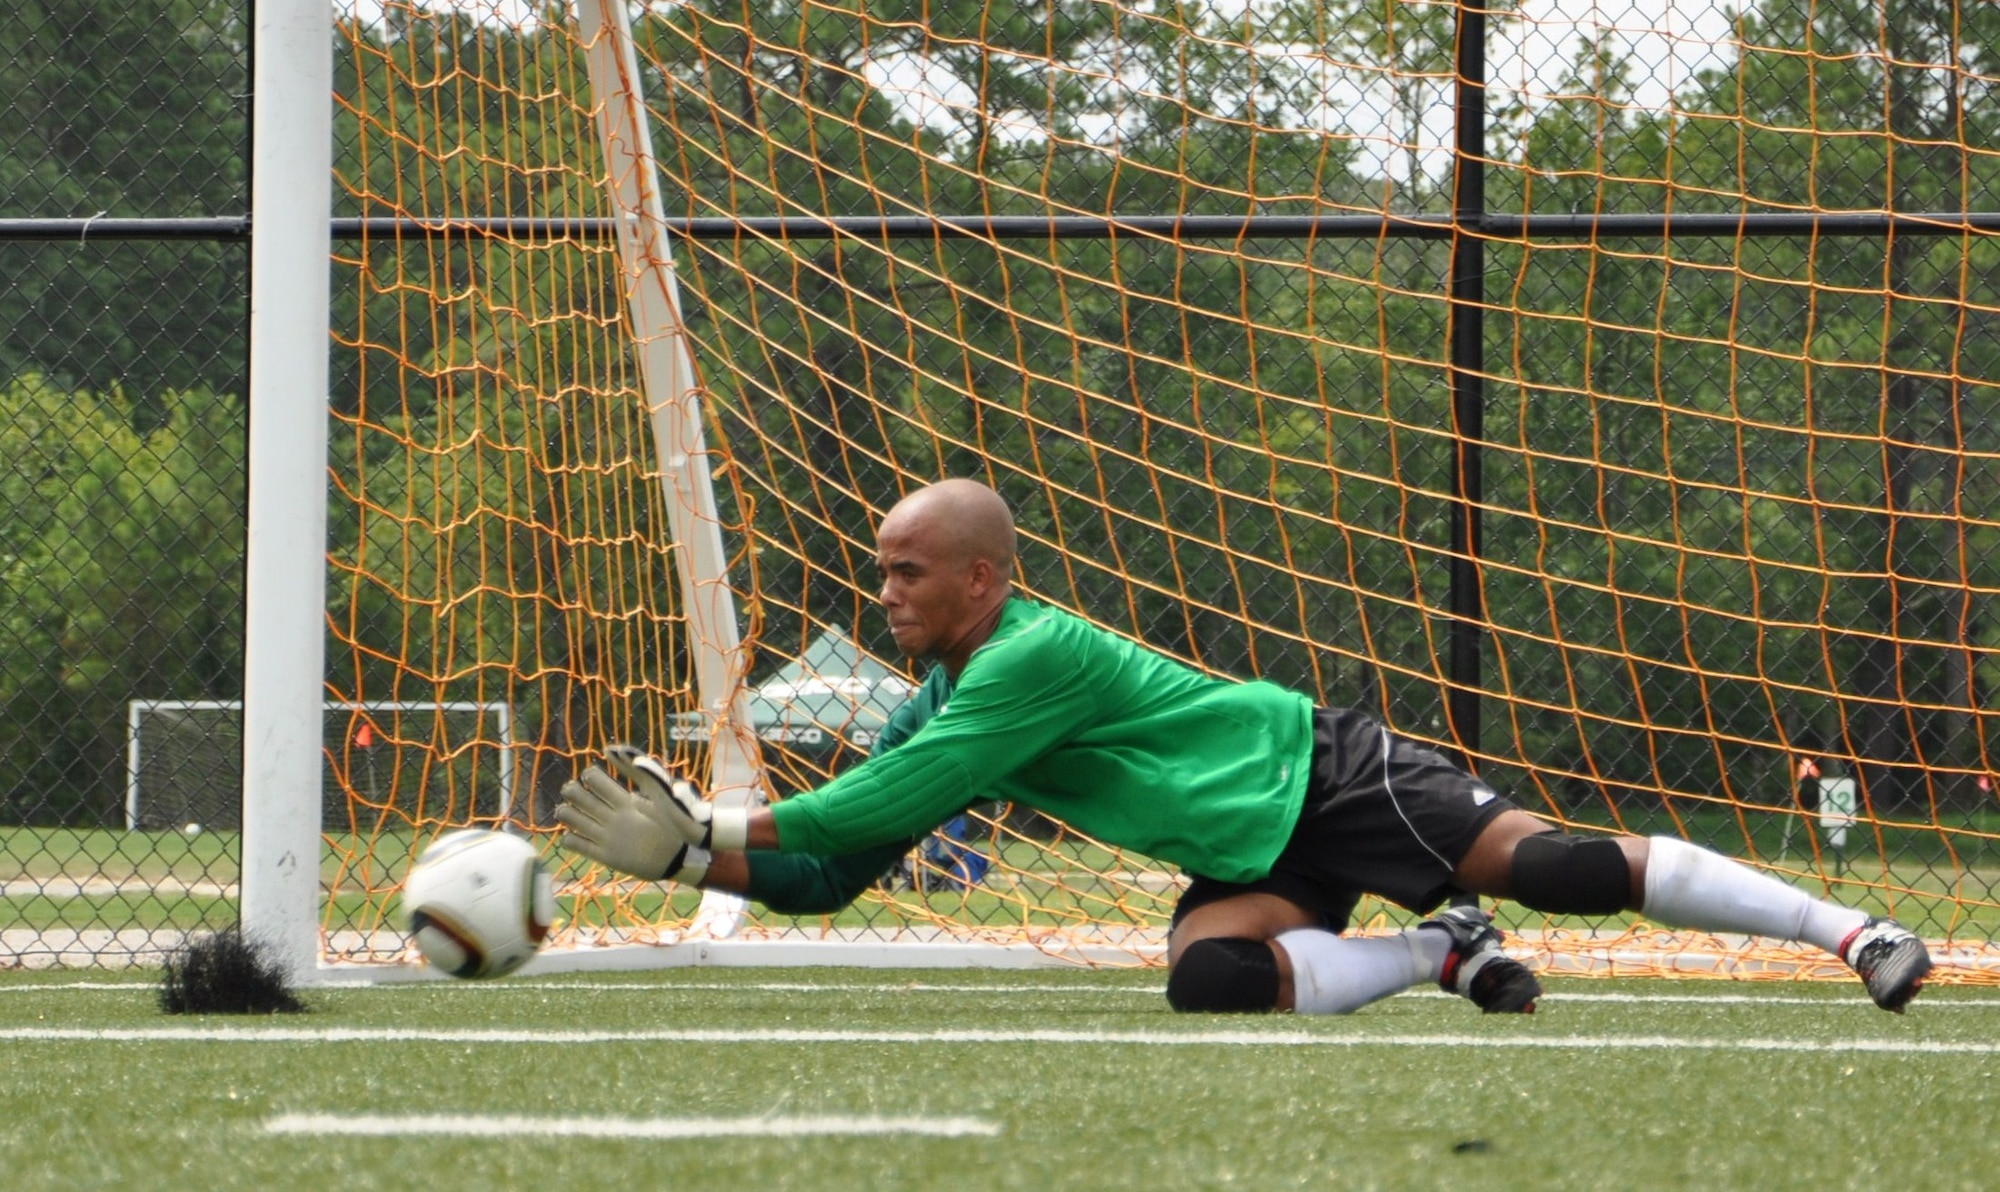 Jordan Kermoade, a Langley Raptors goalkeeper, dives to make a save during practice at the Hampton Roads Soccer Complex in Virginia Beach, Va., Aug. 6, 2011. The Raptors will travel to Joint Base San Antonio, Texas, over the Labor Day weekend to participate in the annual Defender’s Cup, a national military invitational soccer tournament. Kermoade is an Airman 1st class assigned to the 1st Aircraft Maintenance Squadron at Langley Air Force Base. (U.S. Air Force photo by Senior Airman Jason J. Brown/Released)